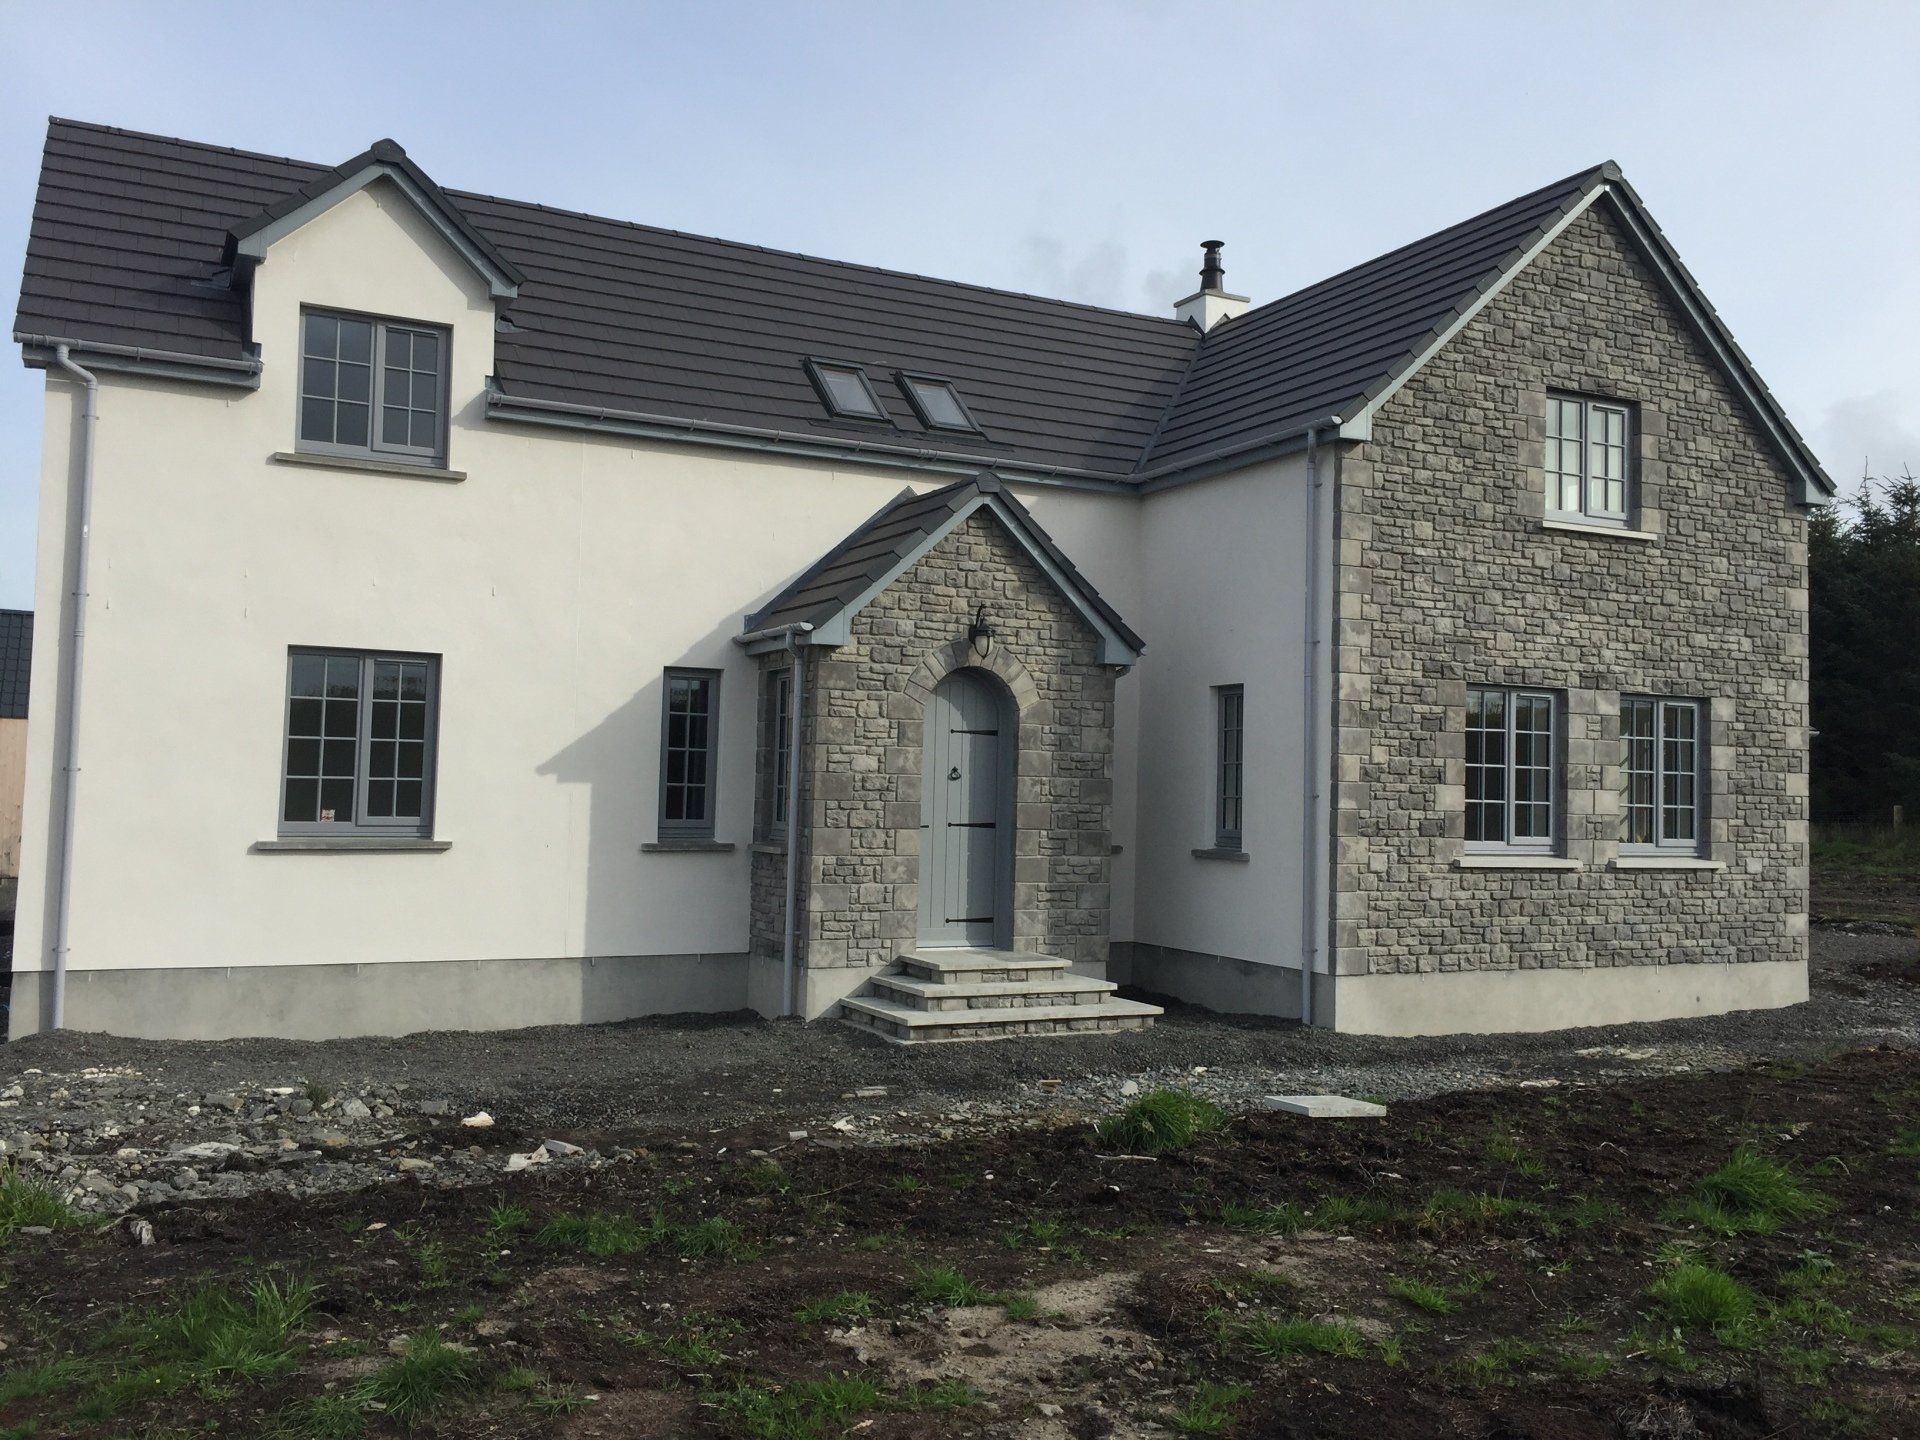 New house with K-Rend roughcasting and stonework